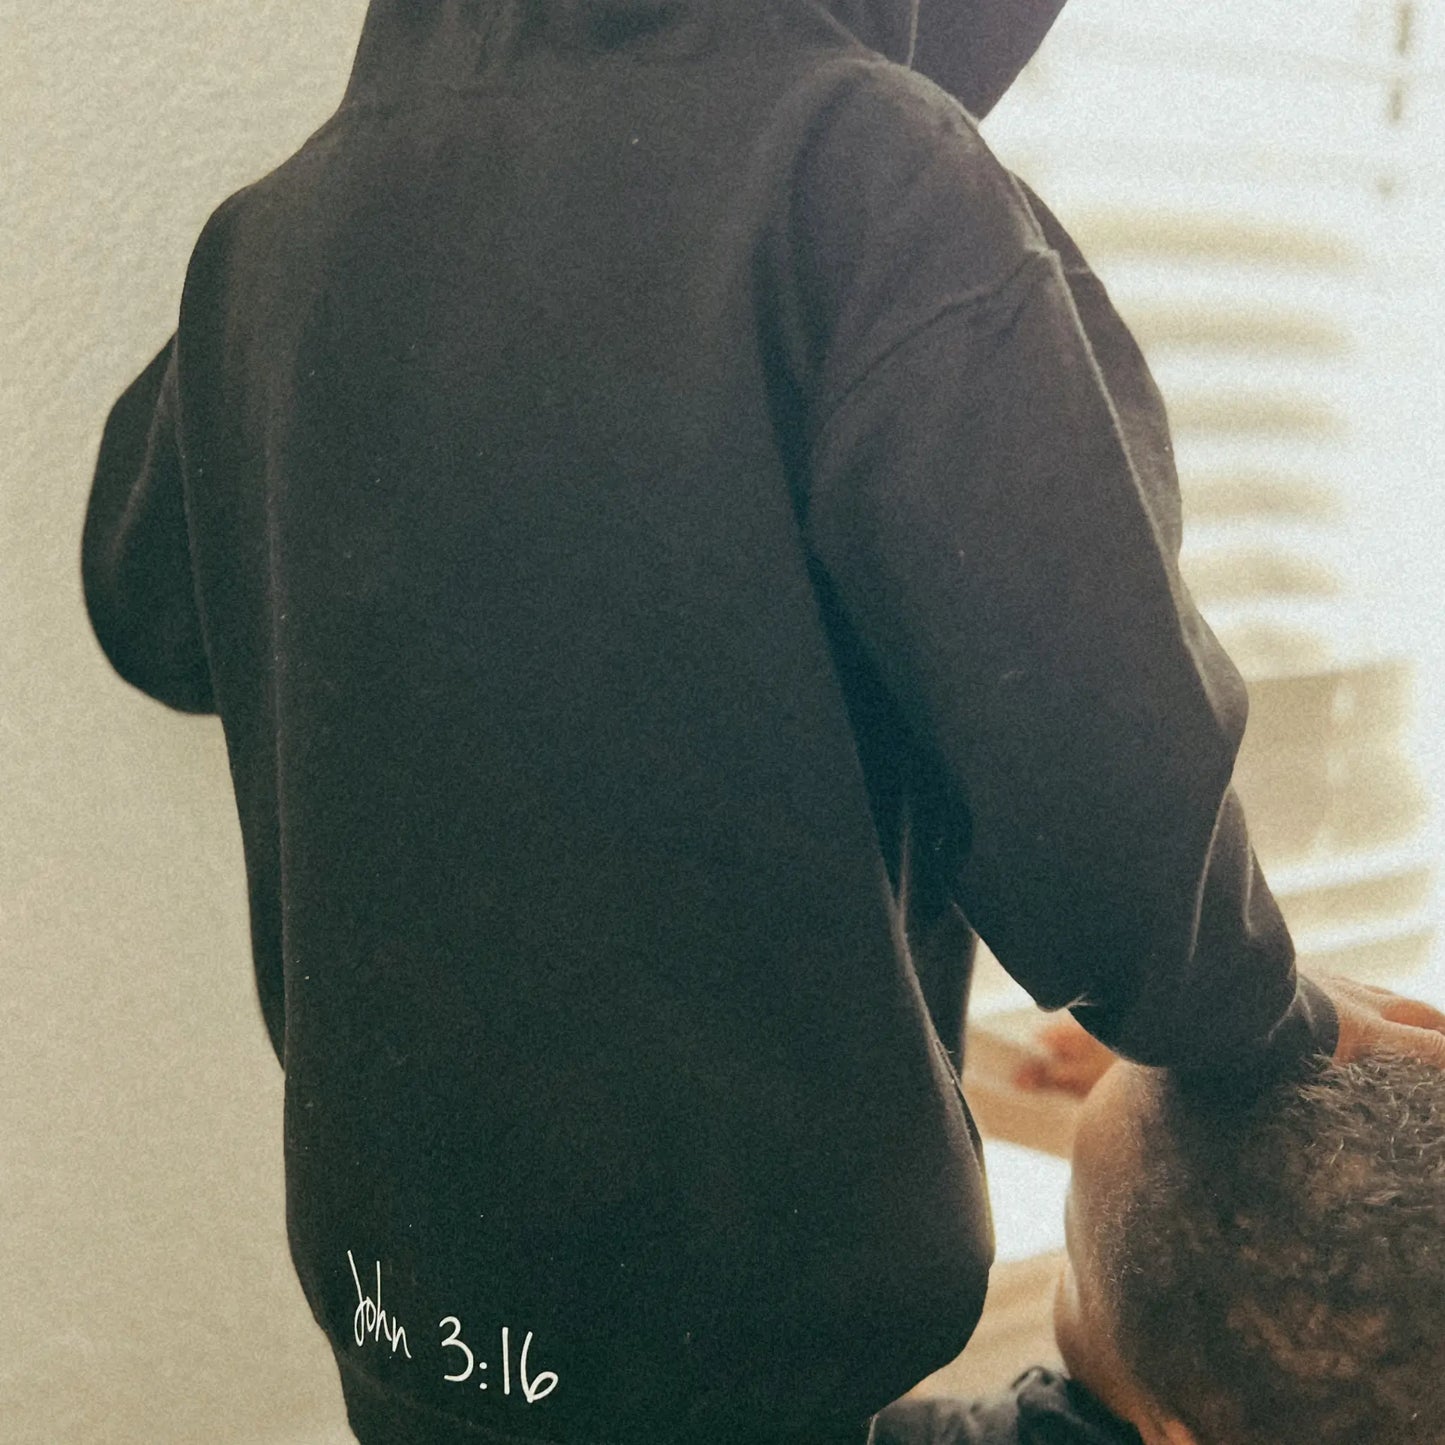 This hoodie is all black with a crew neck style. The words Believer are pressed on the shirt in bold white letters. Hoodie is written across the chest, stretching from sholder to shoulder. The Hoodie this comftorable and fitted. Size up for an oversized look. Edit alt text. On a Nuetral Colored back ground. The back reads John 3:16 on the tail of the Hoodie.